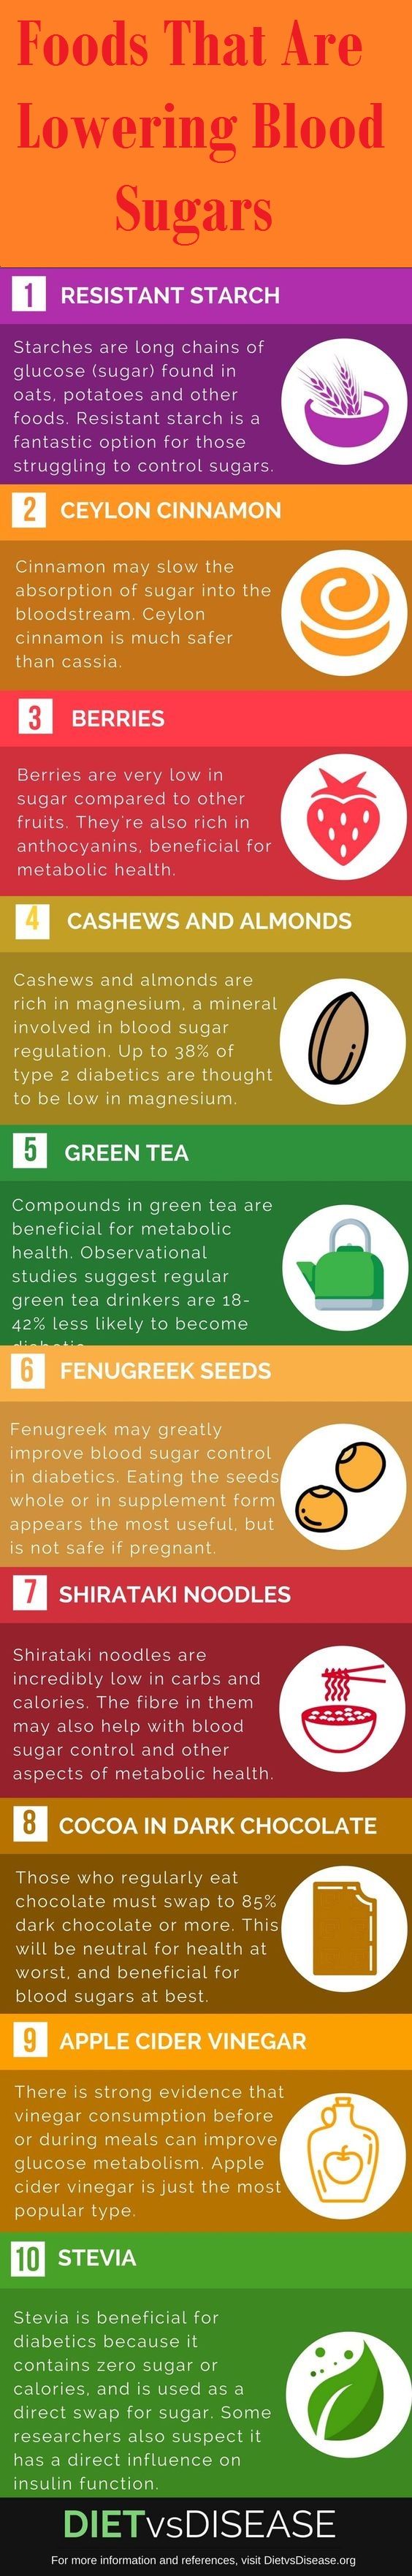 Foods That Lower Blood Sugar Instantly-Blessing For the Diabetic Patients